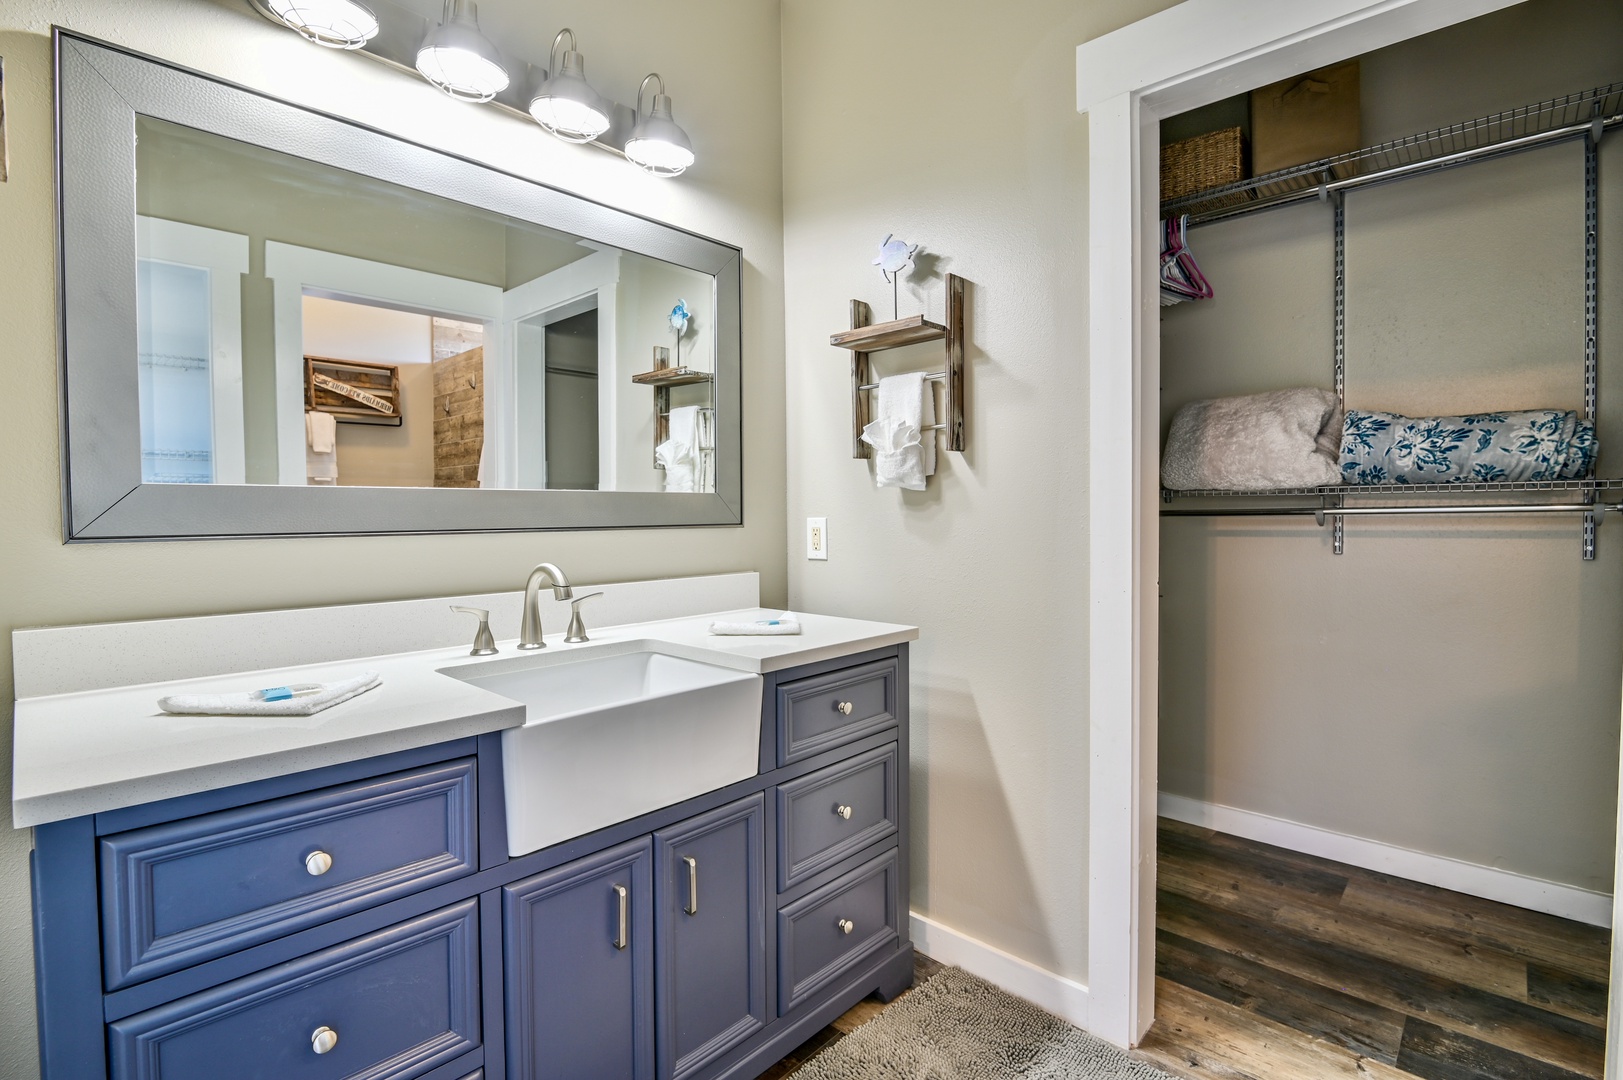 A stylish vanity and luxurious shower awaits in the king ensuite